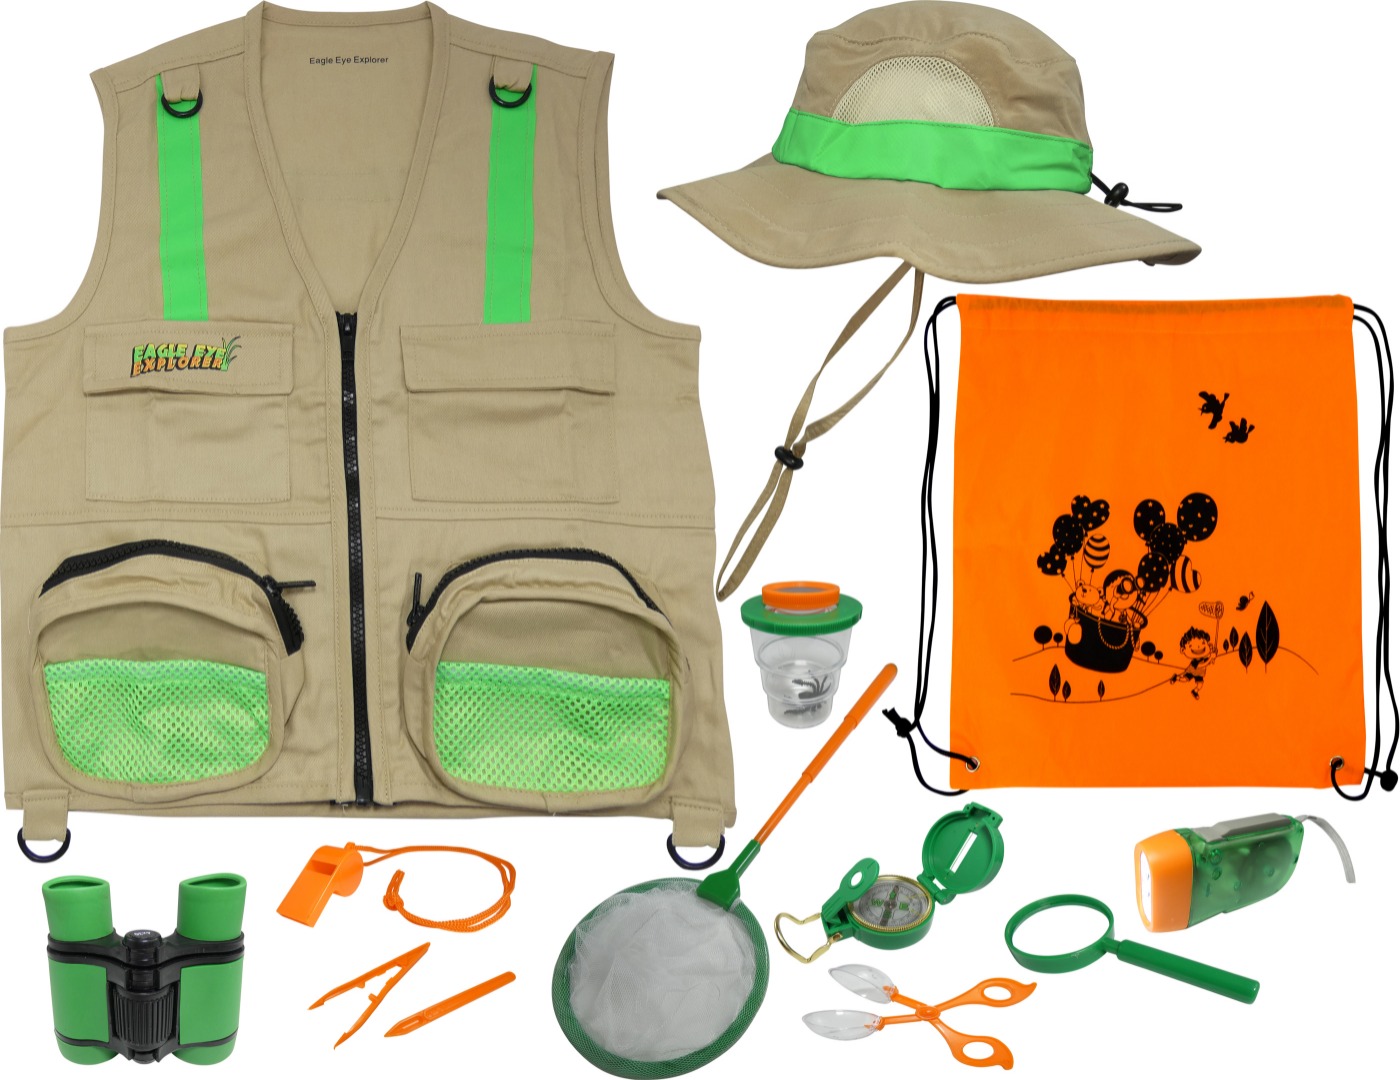 Eagle Eye Explorer Vest and Shorts Set for Outdoor Exploration, Play,  Hiking, Camping, Fishing, Adventure (Tan, Small/Medium) at  Men's  Clothing store